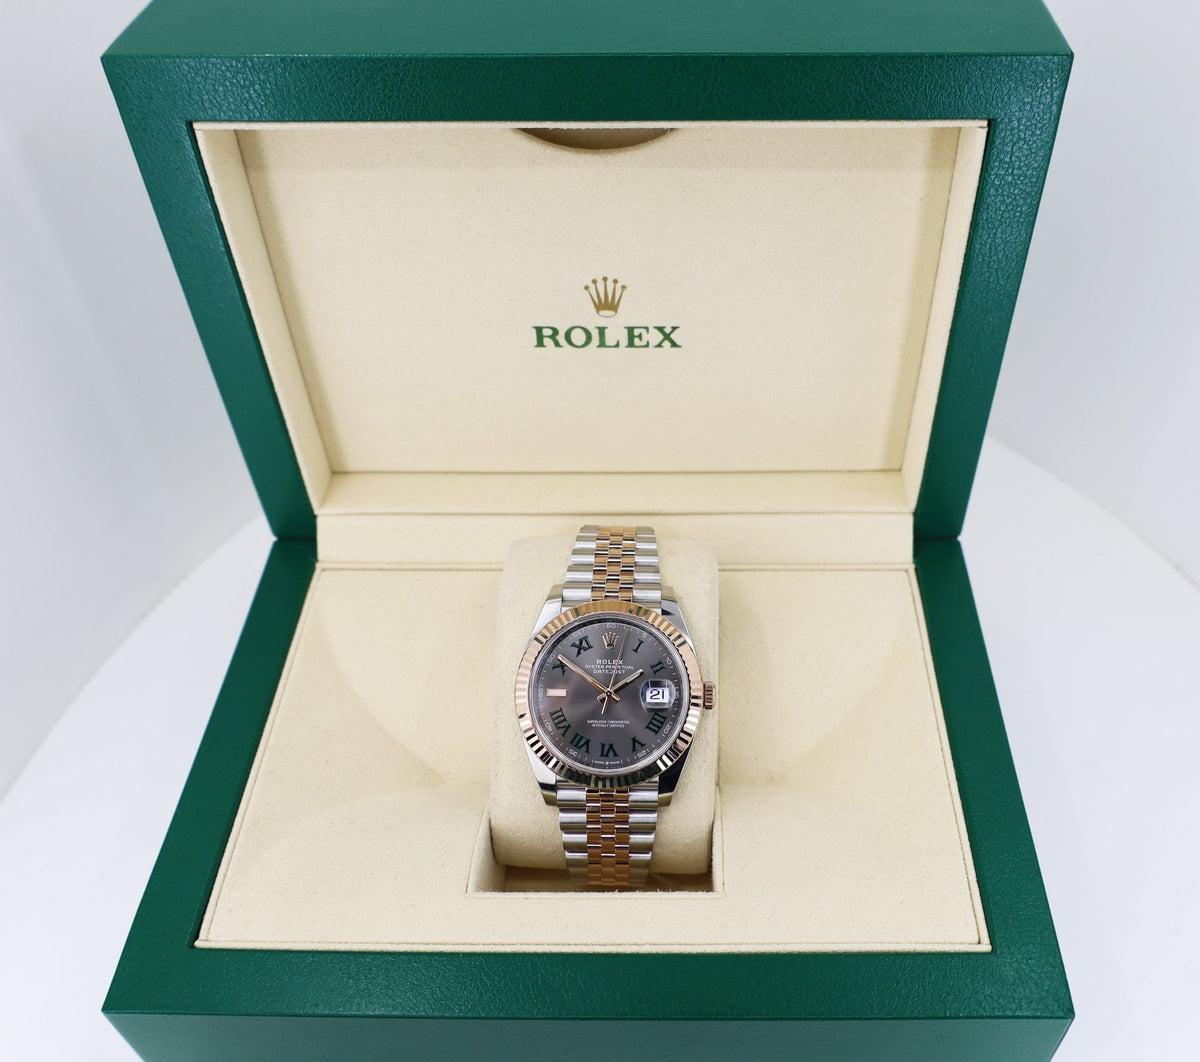 Rolex Oyster Perpetual Datejust 41 Watch, Chocolate set with diamonds,  Fluted bezel, Two-tone Jubilee bracelet 126331-0004